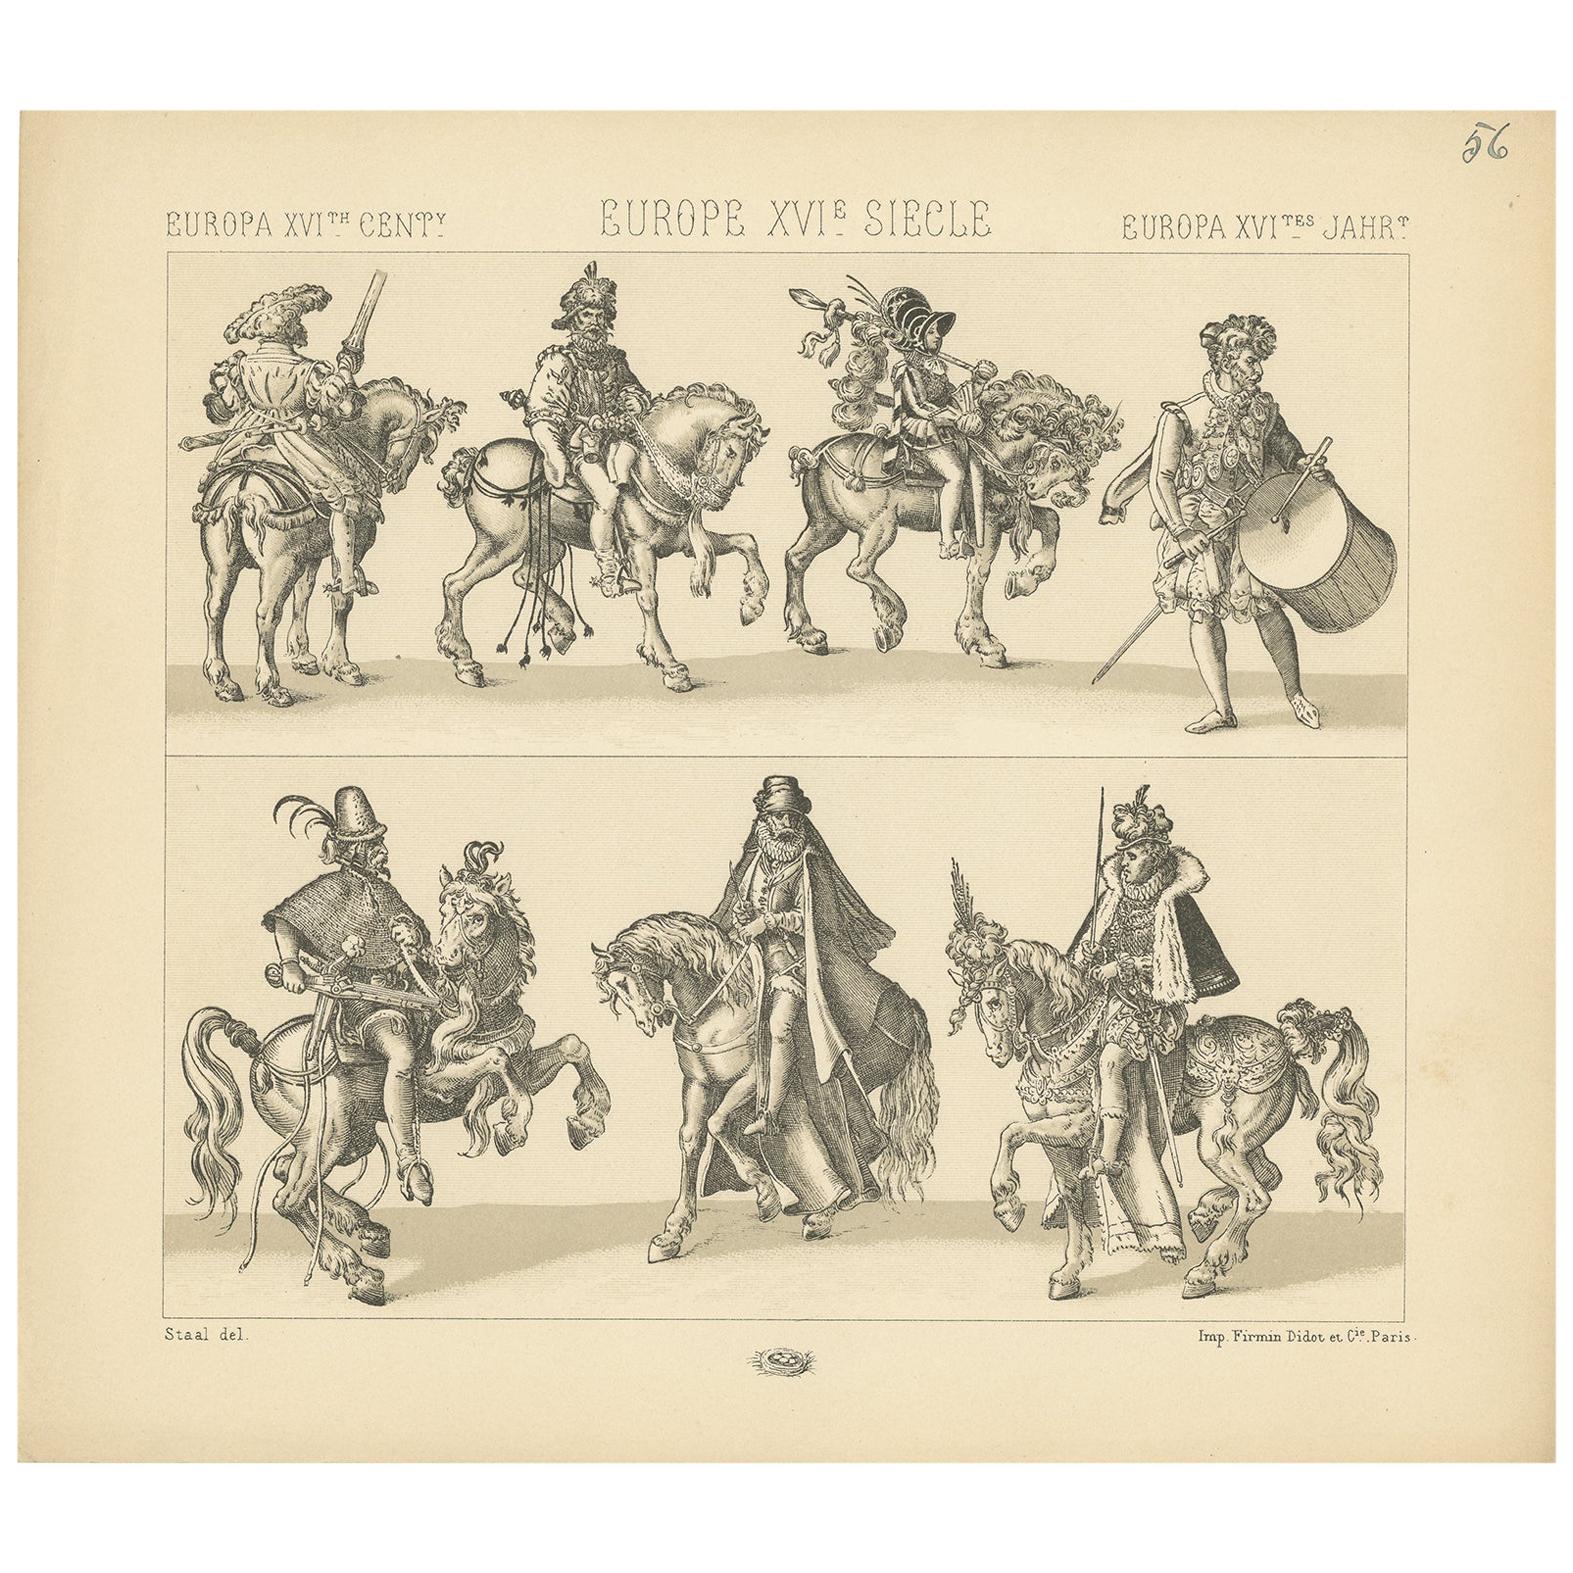 Pl 56 Antique Print of European 16th Century Battle Costumes by Racinet For Sale